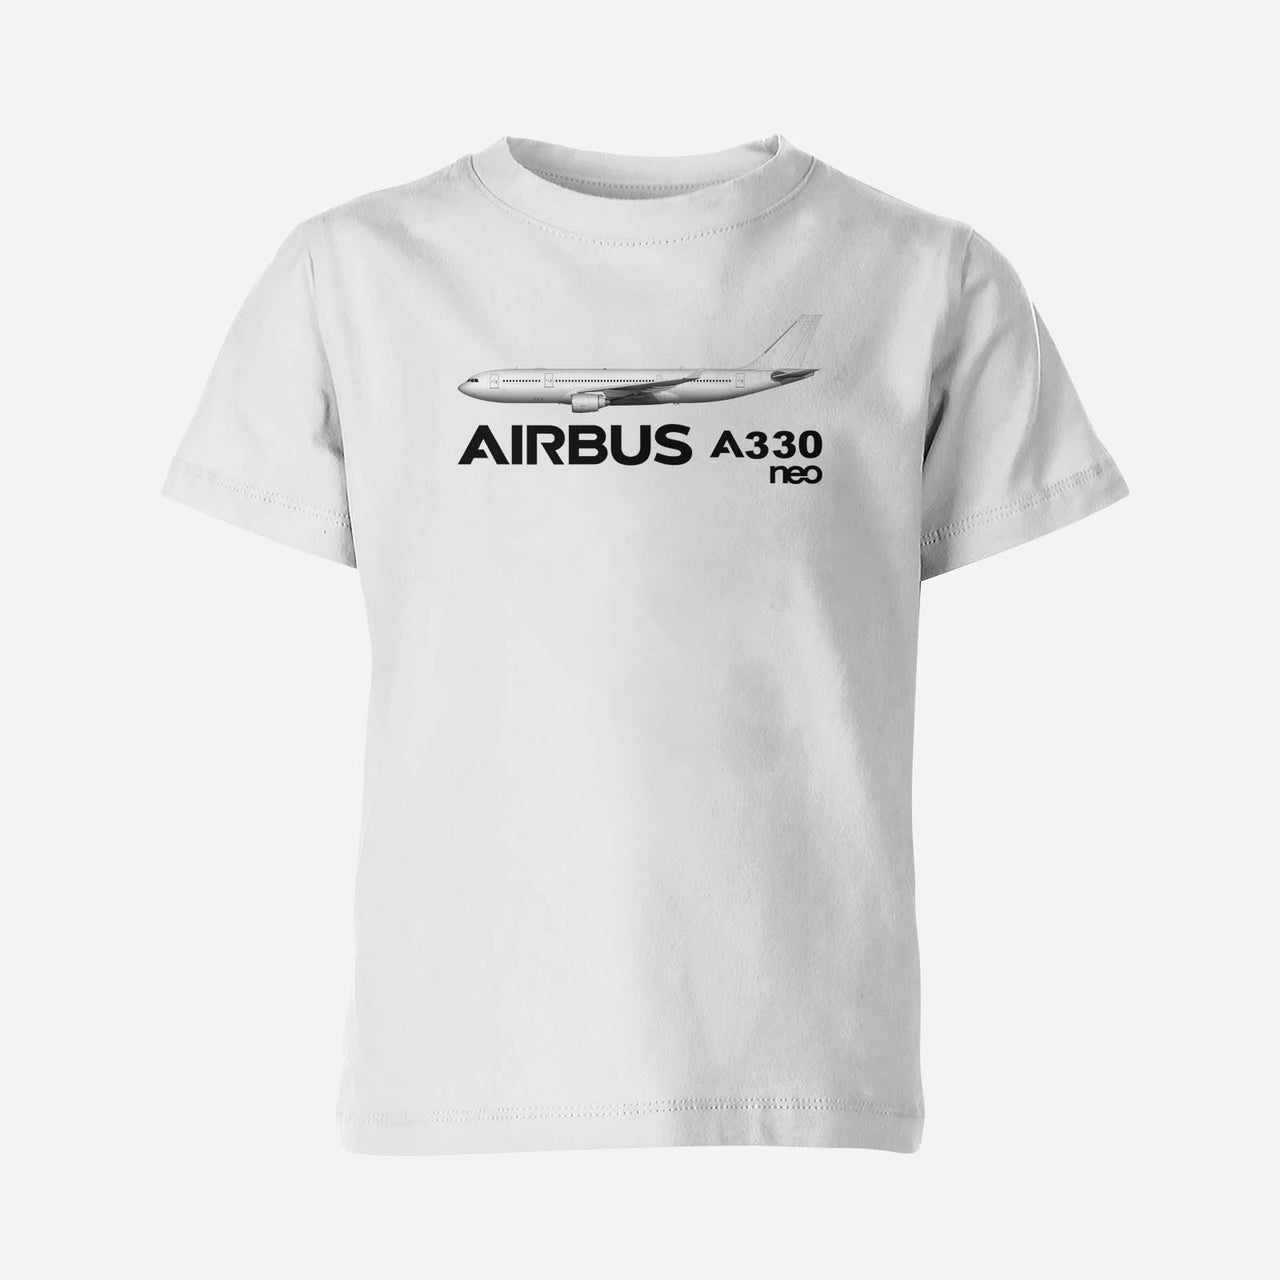 The Airbus A330neo Designed Children T-Shirts